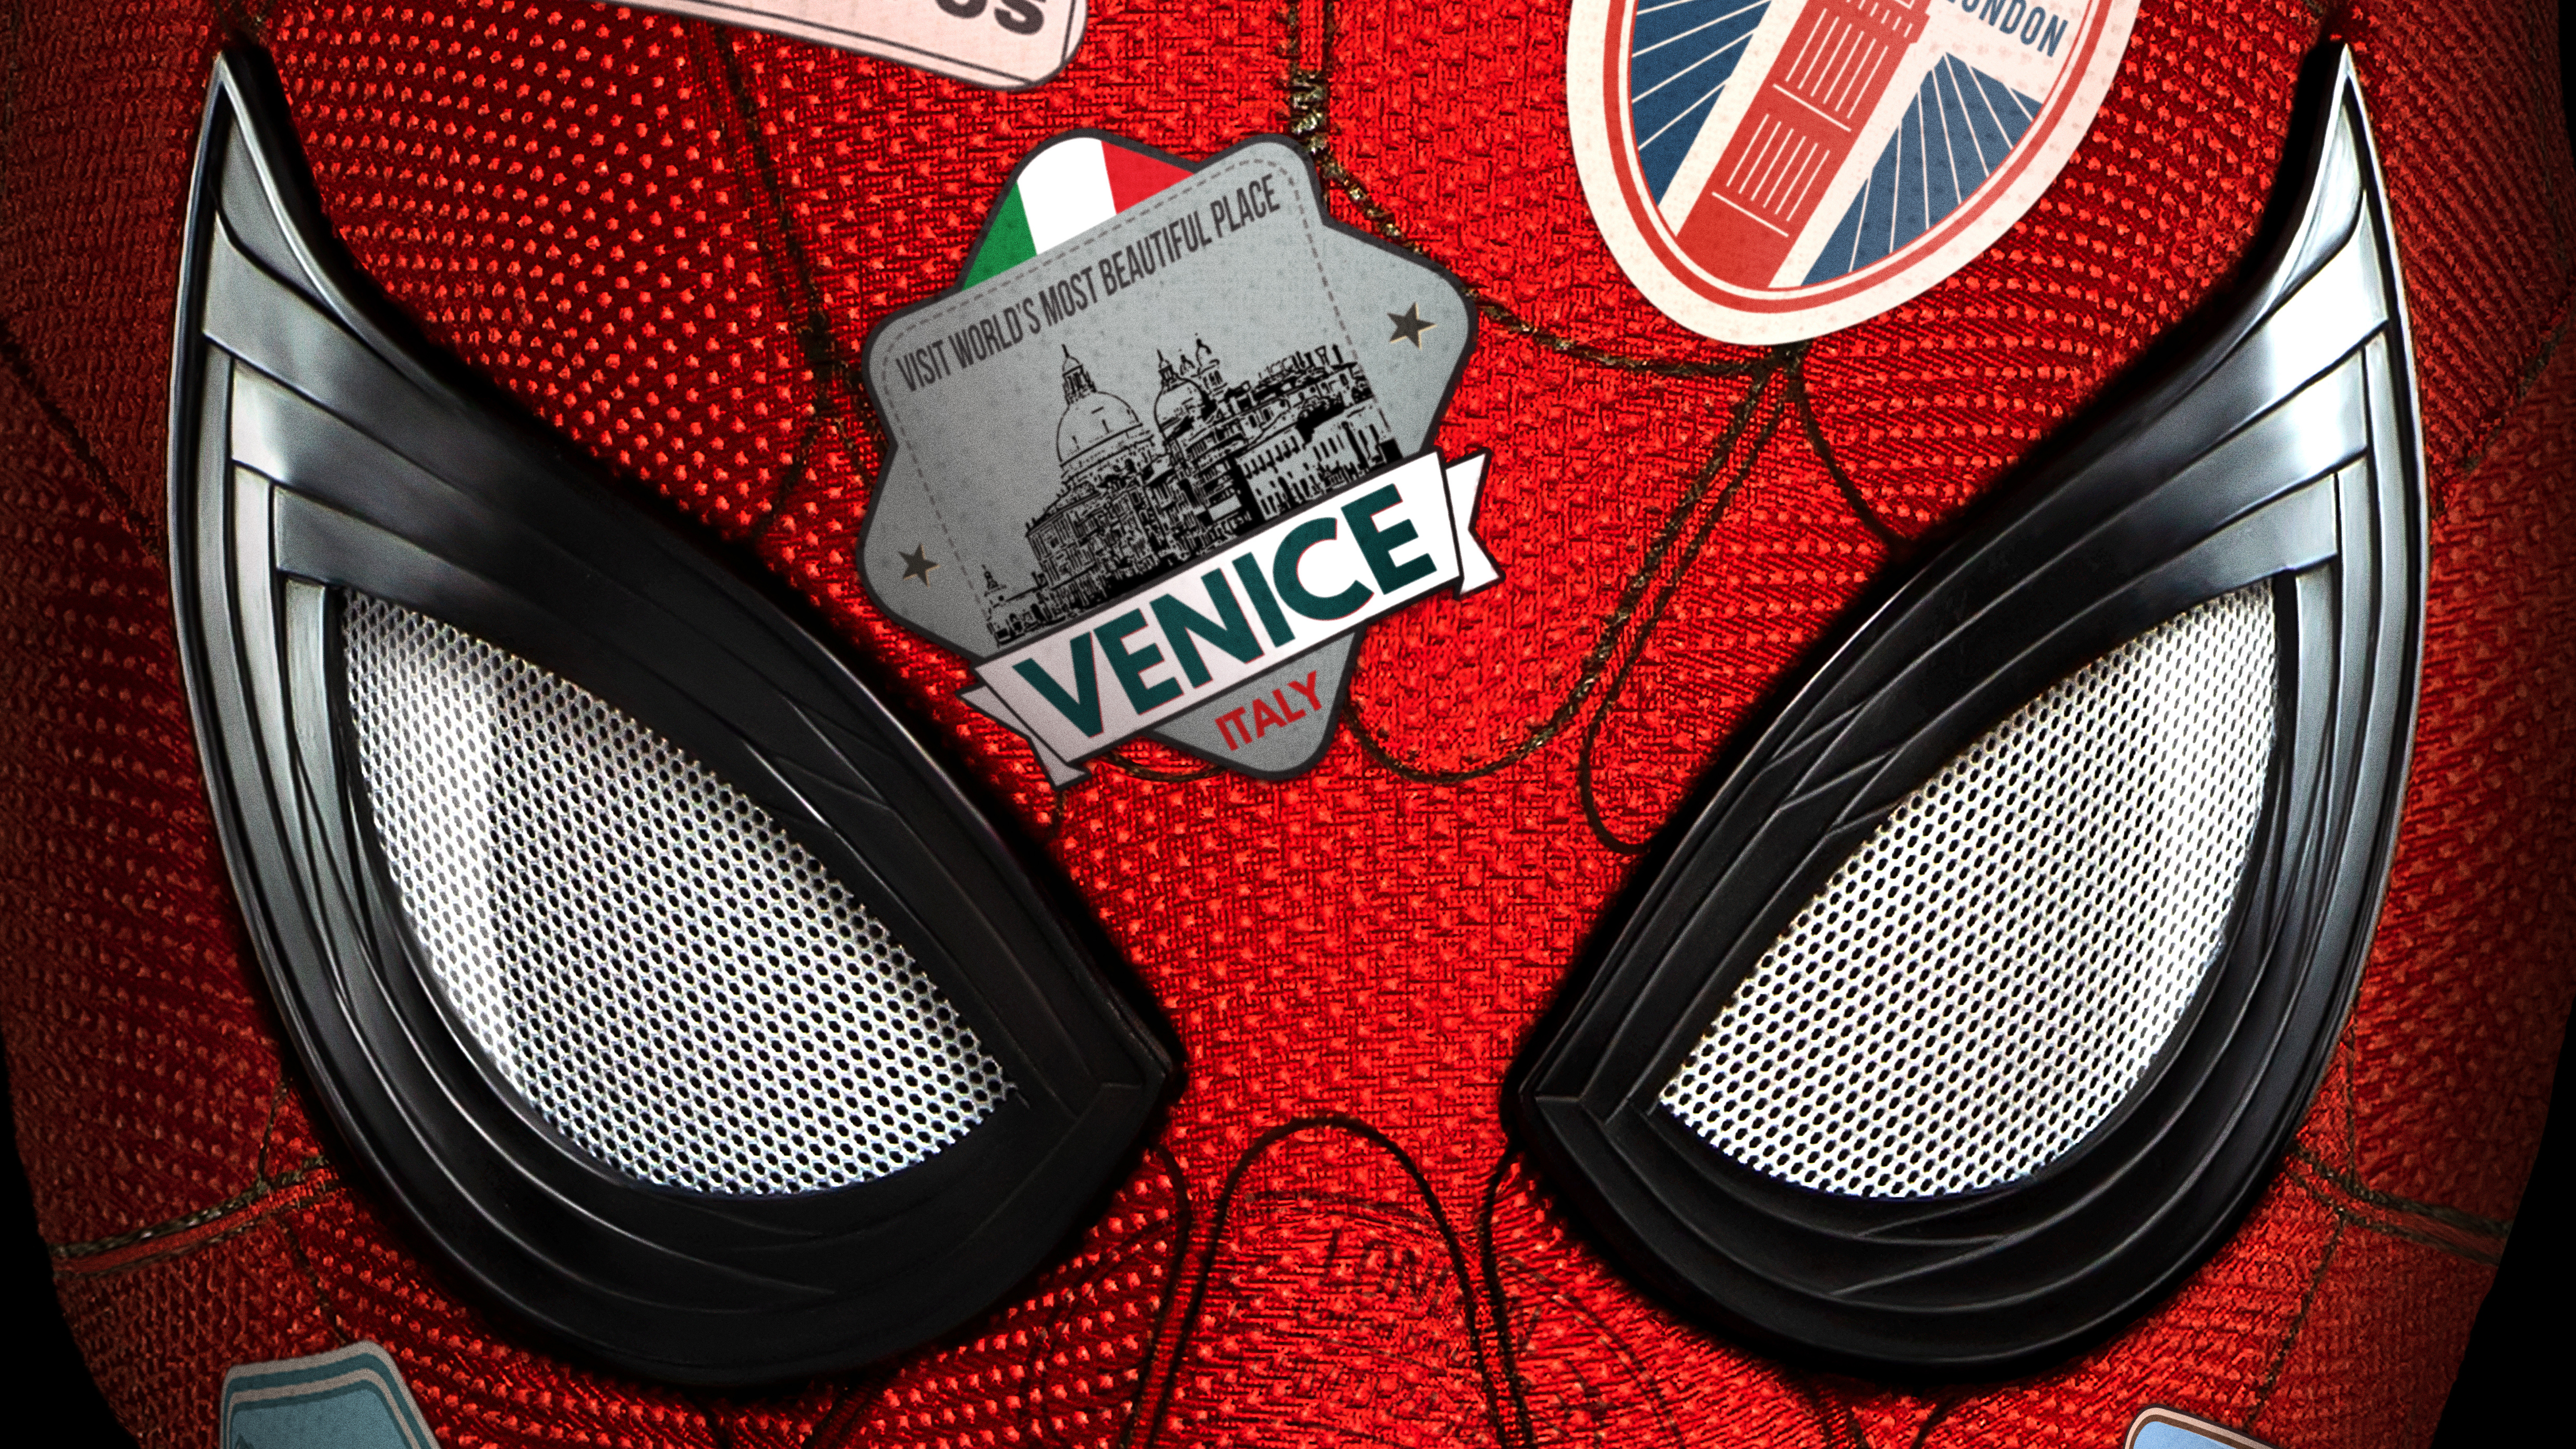 Movie Spider-Man: Far From Home HD Wallpaper | Background Image